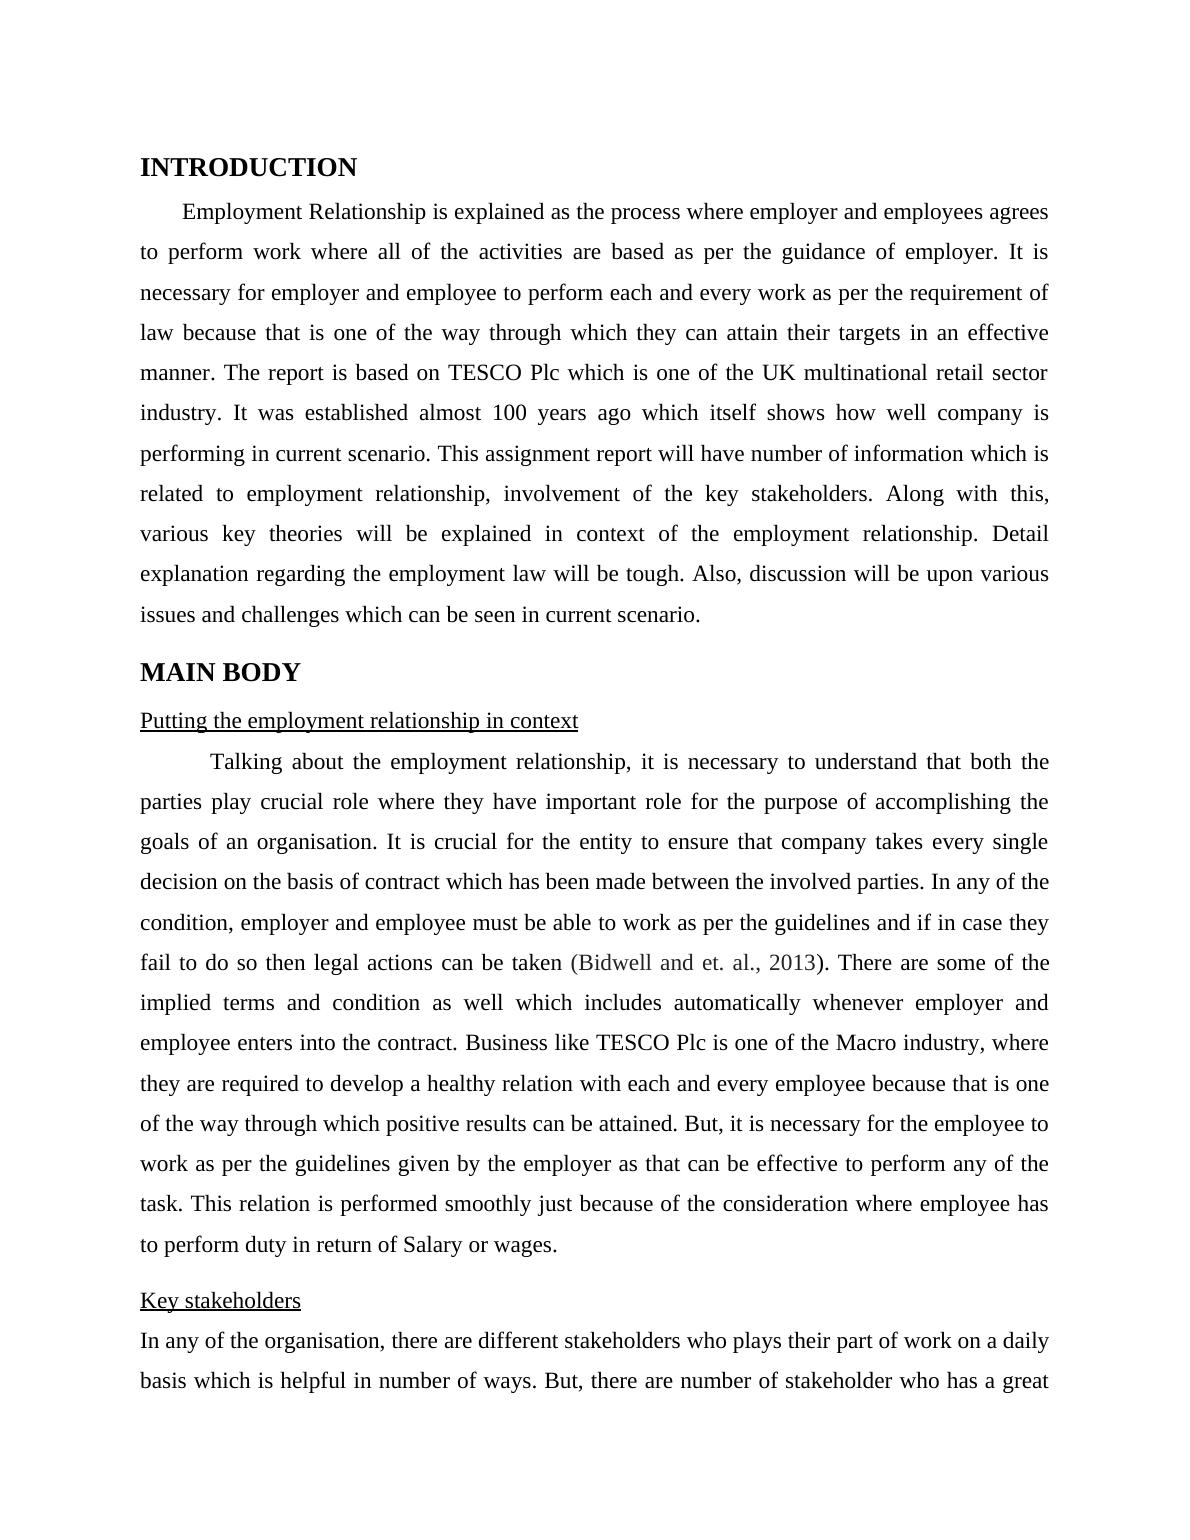 Employment Relationship and Key Stakeholders_3